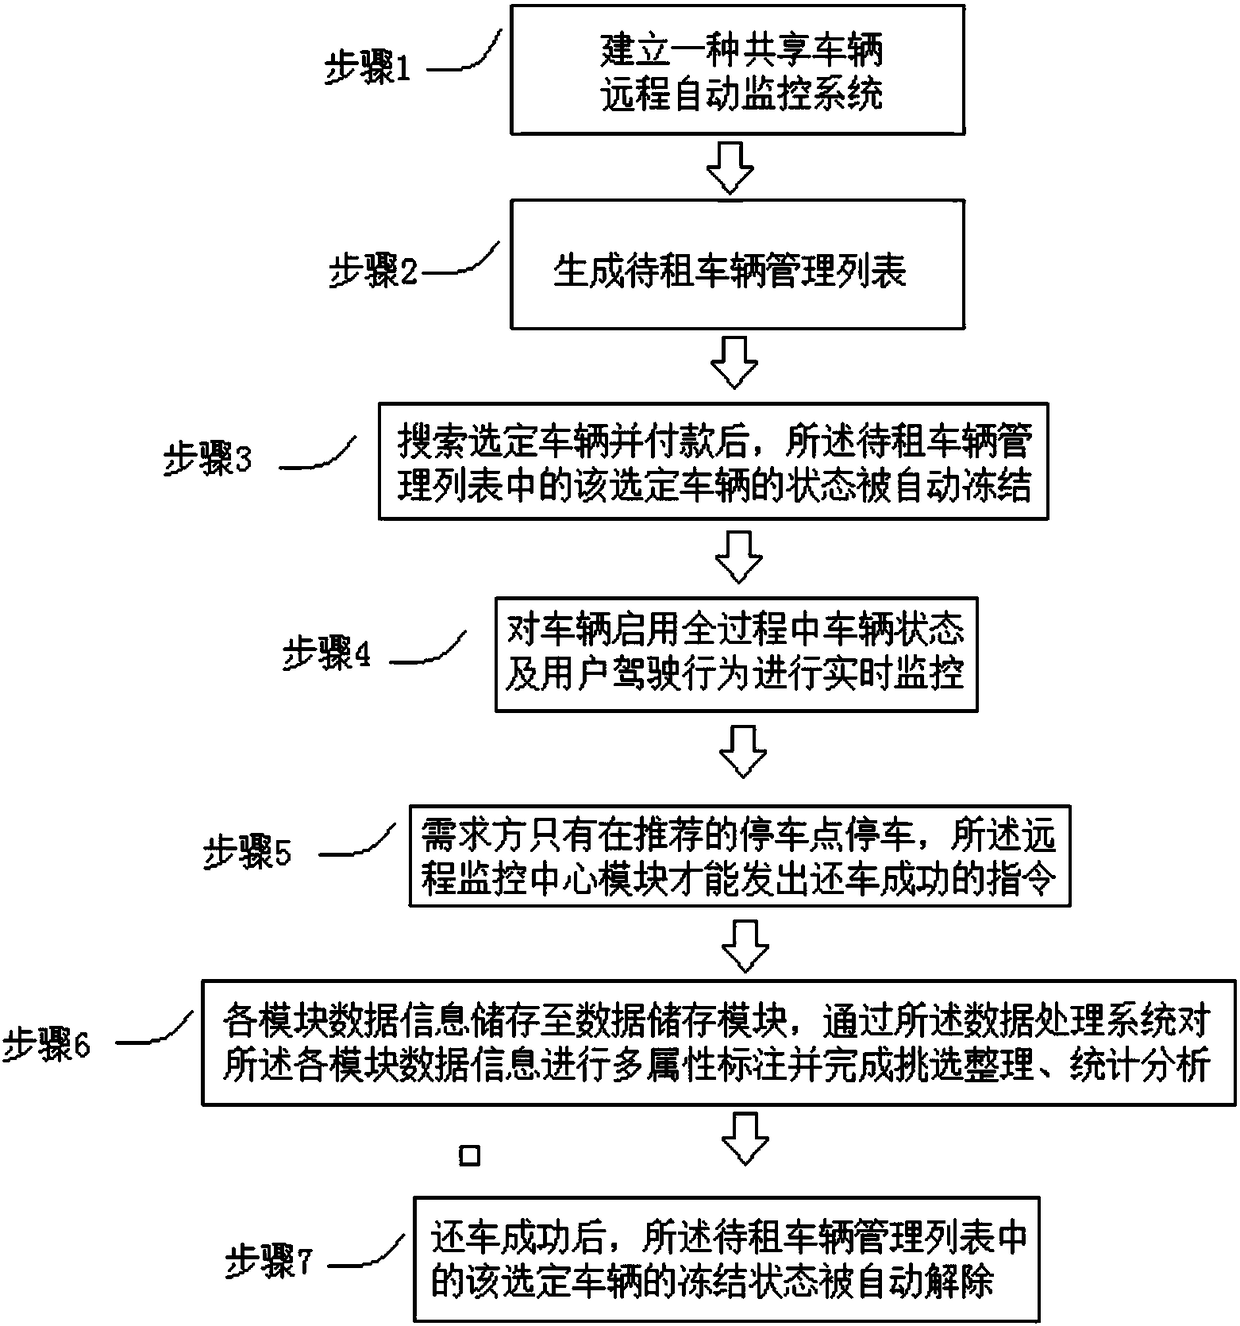 Cloud scheduling sharing method of social idle vehicles